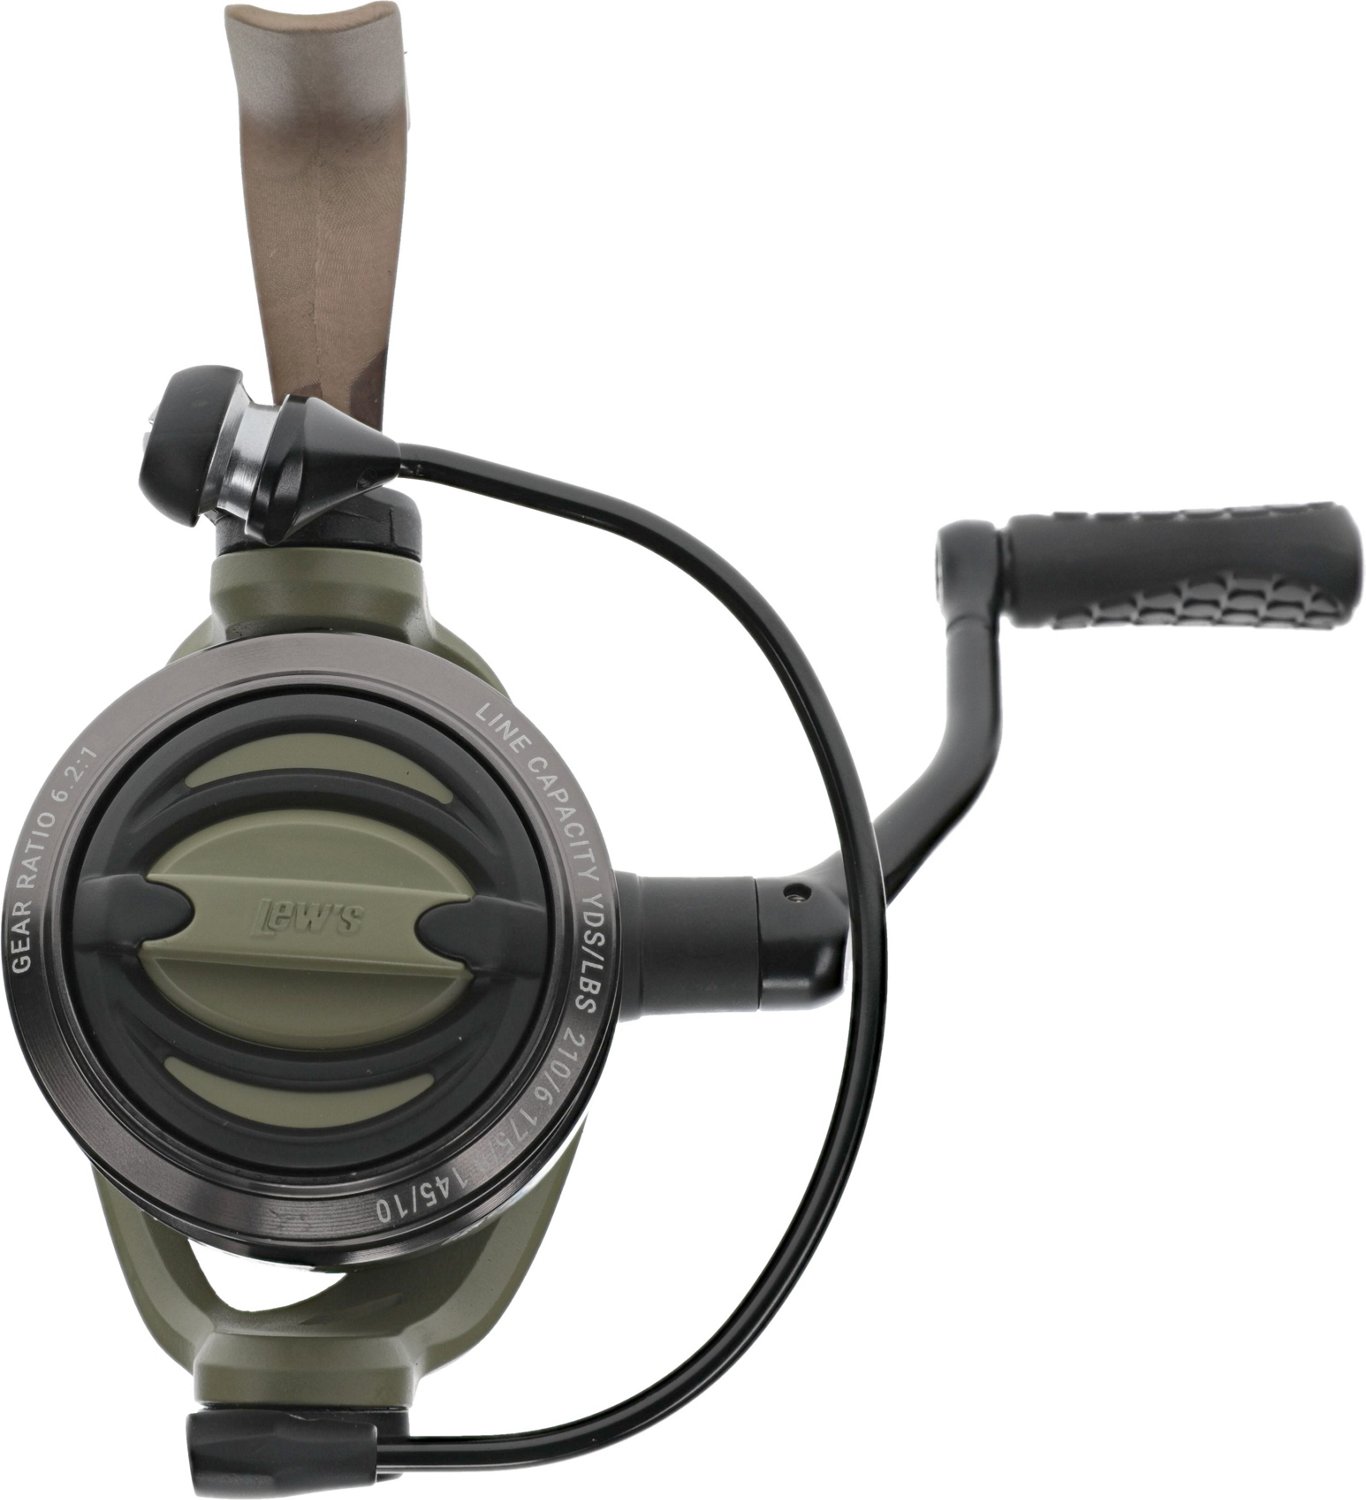  Lew's American Hero 200 6.2:1 Spinning Reel : Sports & Outdoors